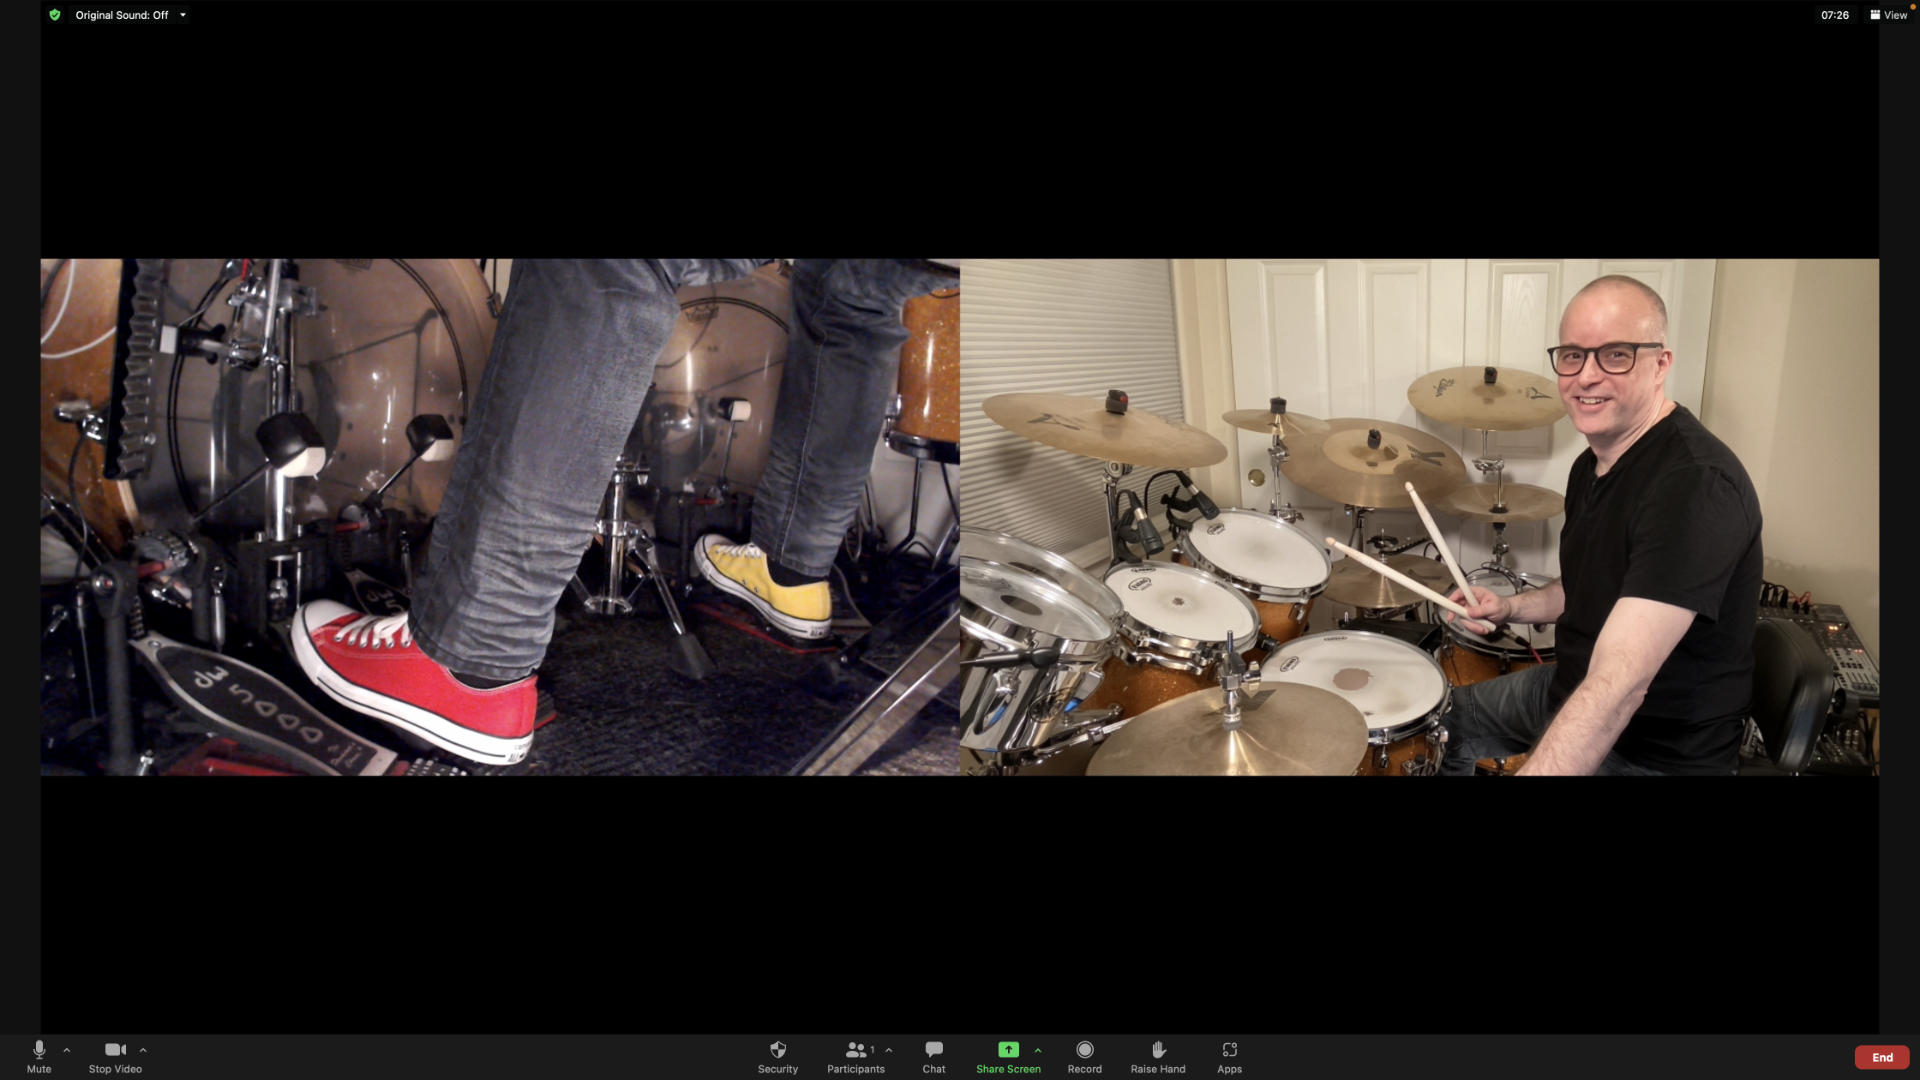 Side-by-side cameras with drumset and feet.